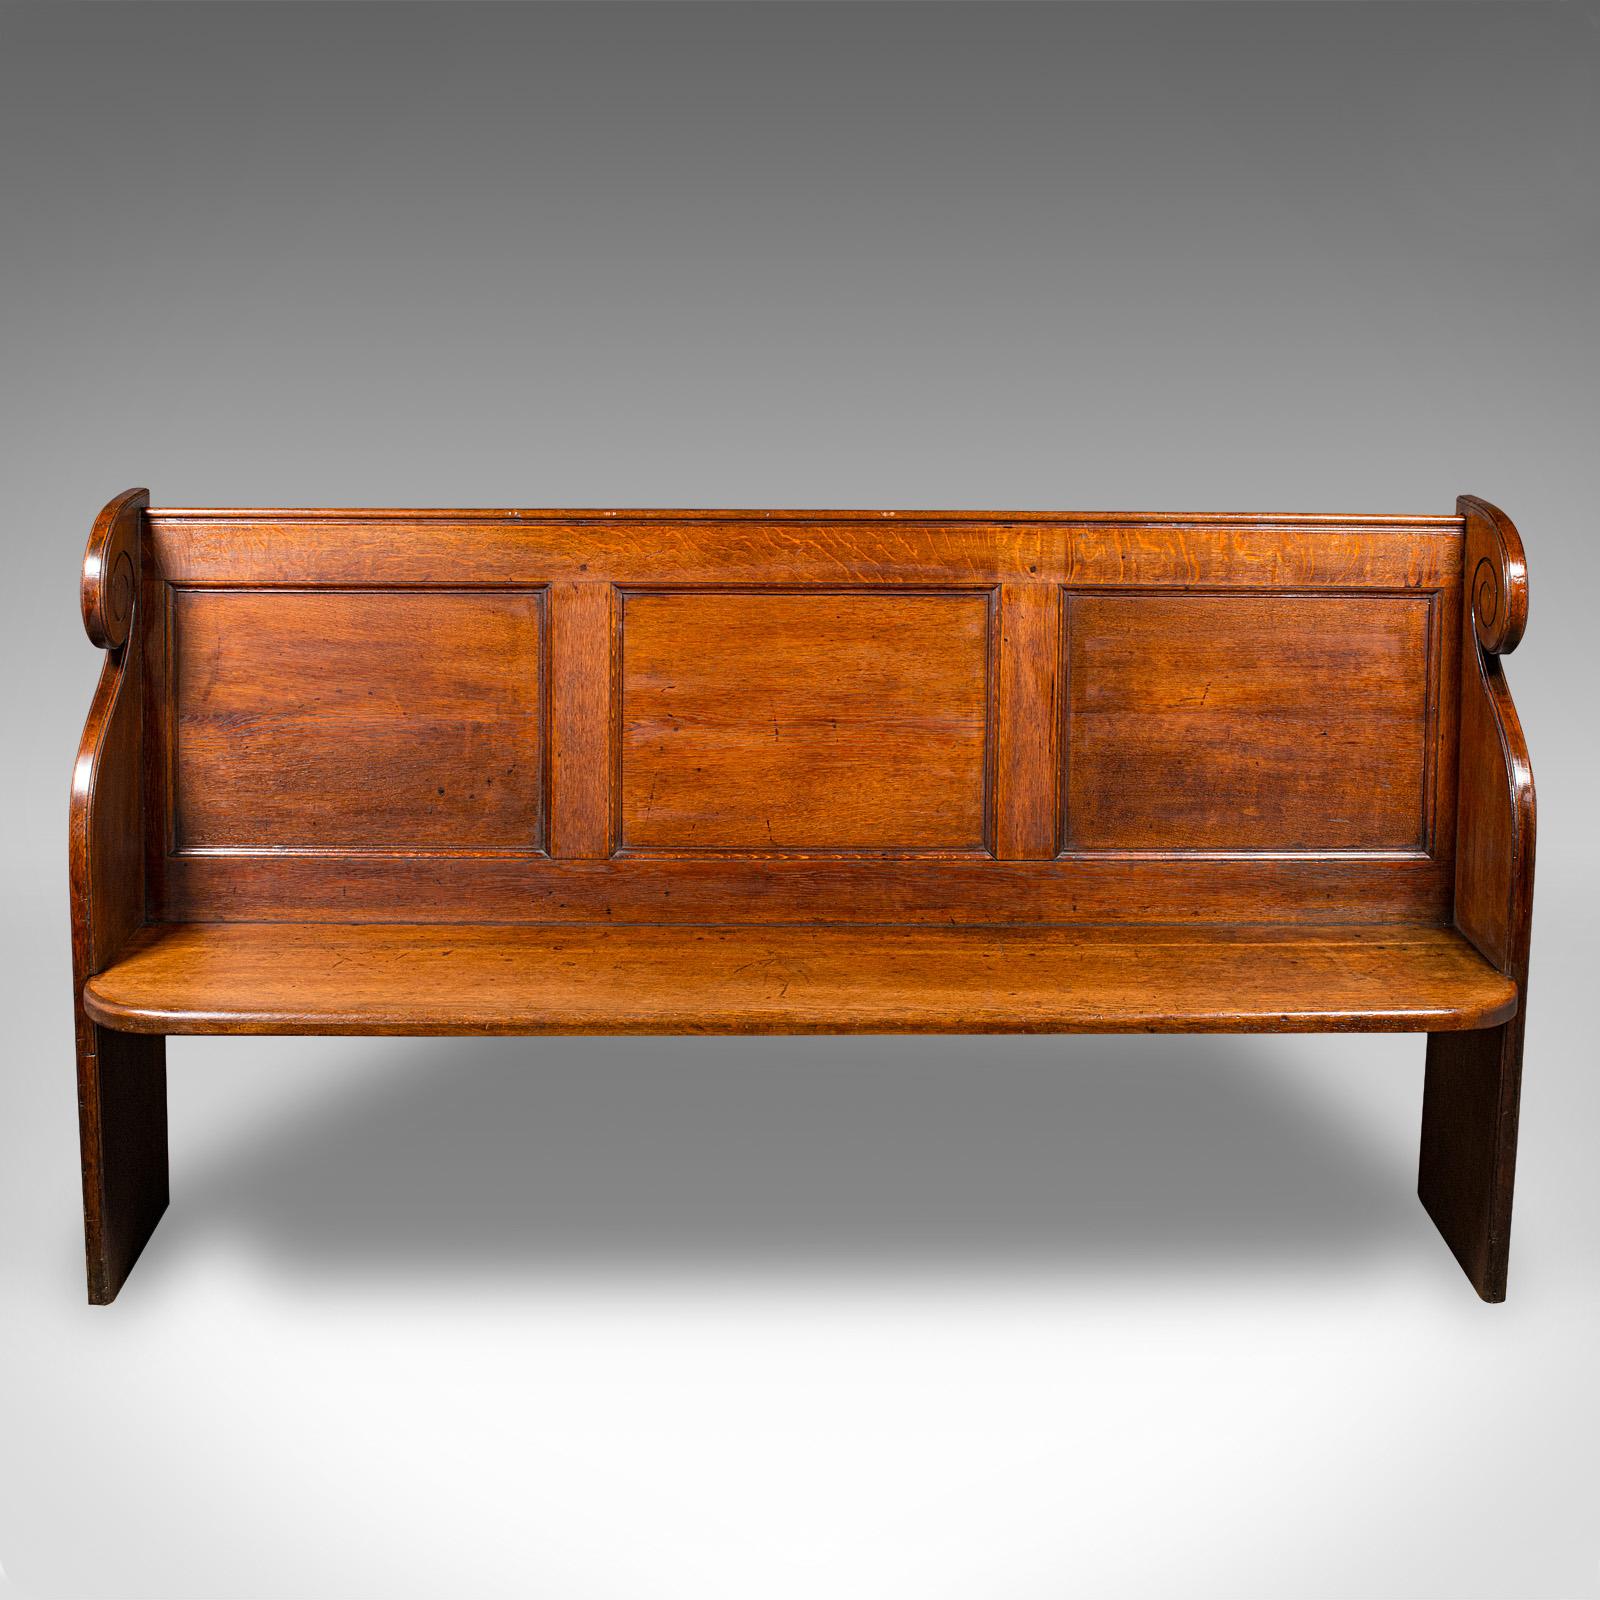 
This is an antique 3 panelled church pew. An English, oak bench with ecclesiastic taste, dating to the early Victorian period, circa 1850.

Superb in proportion and finish, with distinctive serpentine curvature
Displays a desirable aged patina and